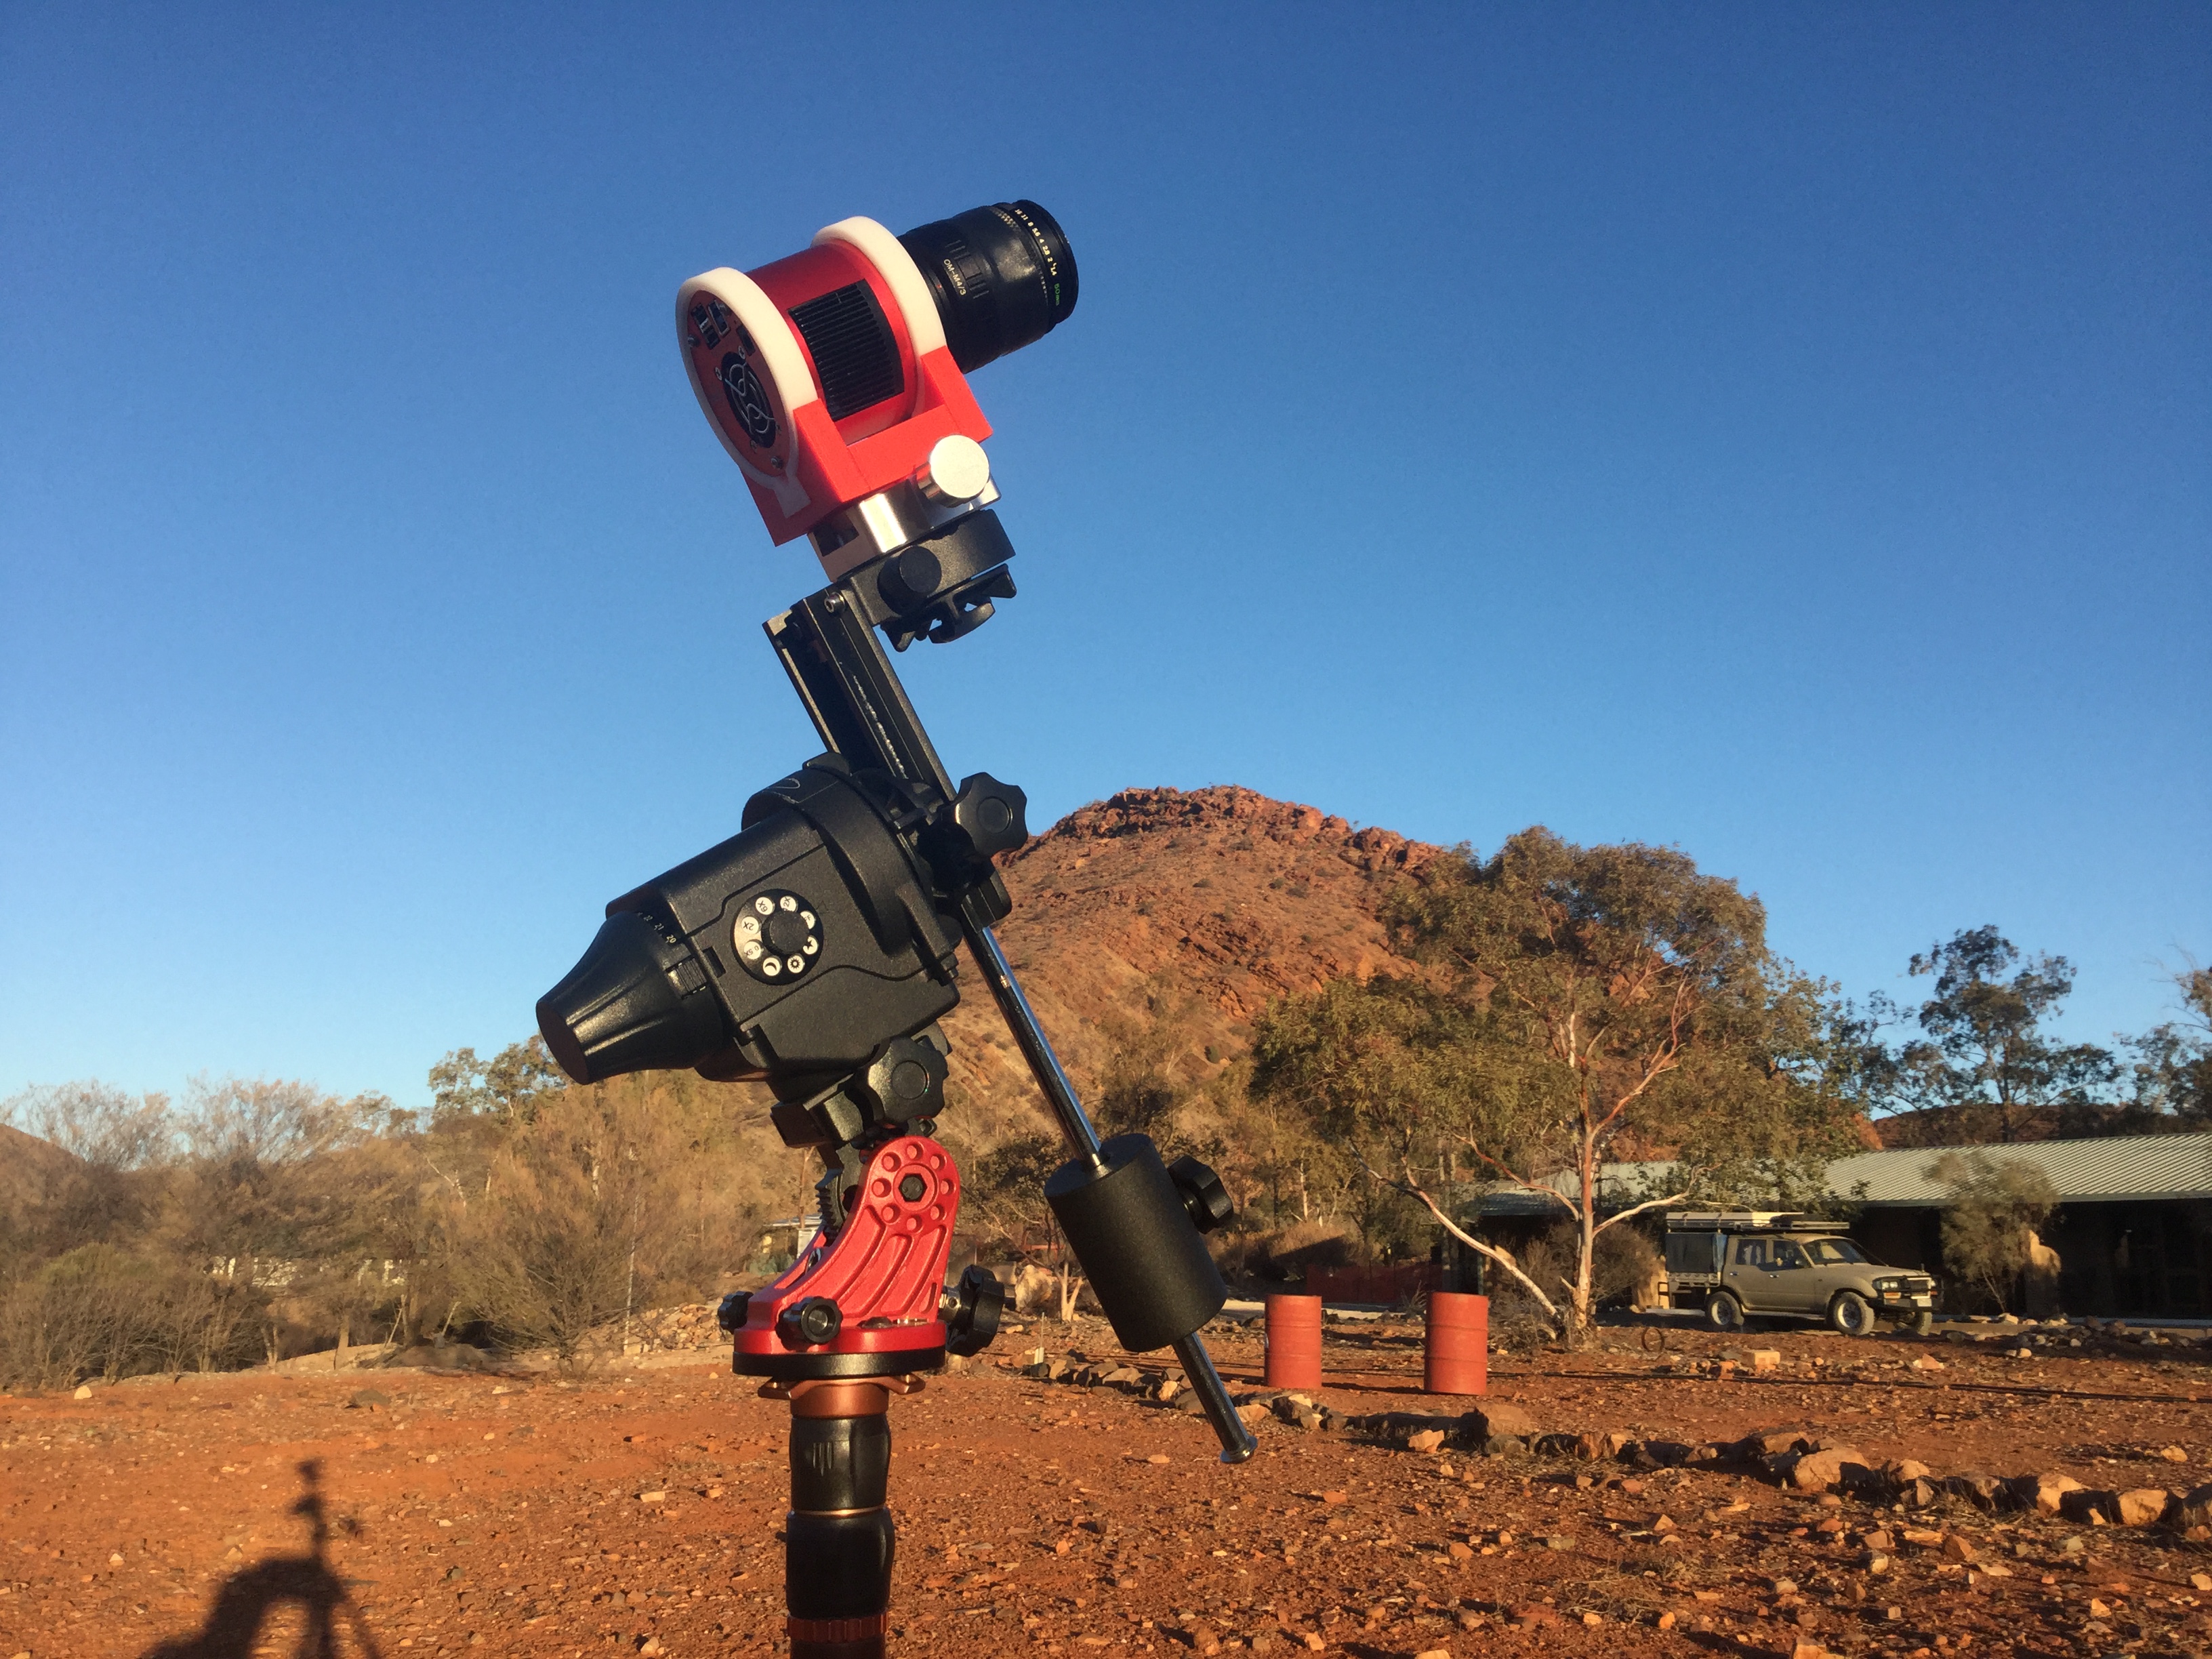 ZWO ASI 294 MCPRO on the Skywatcher Star Adventure tracking mount